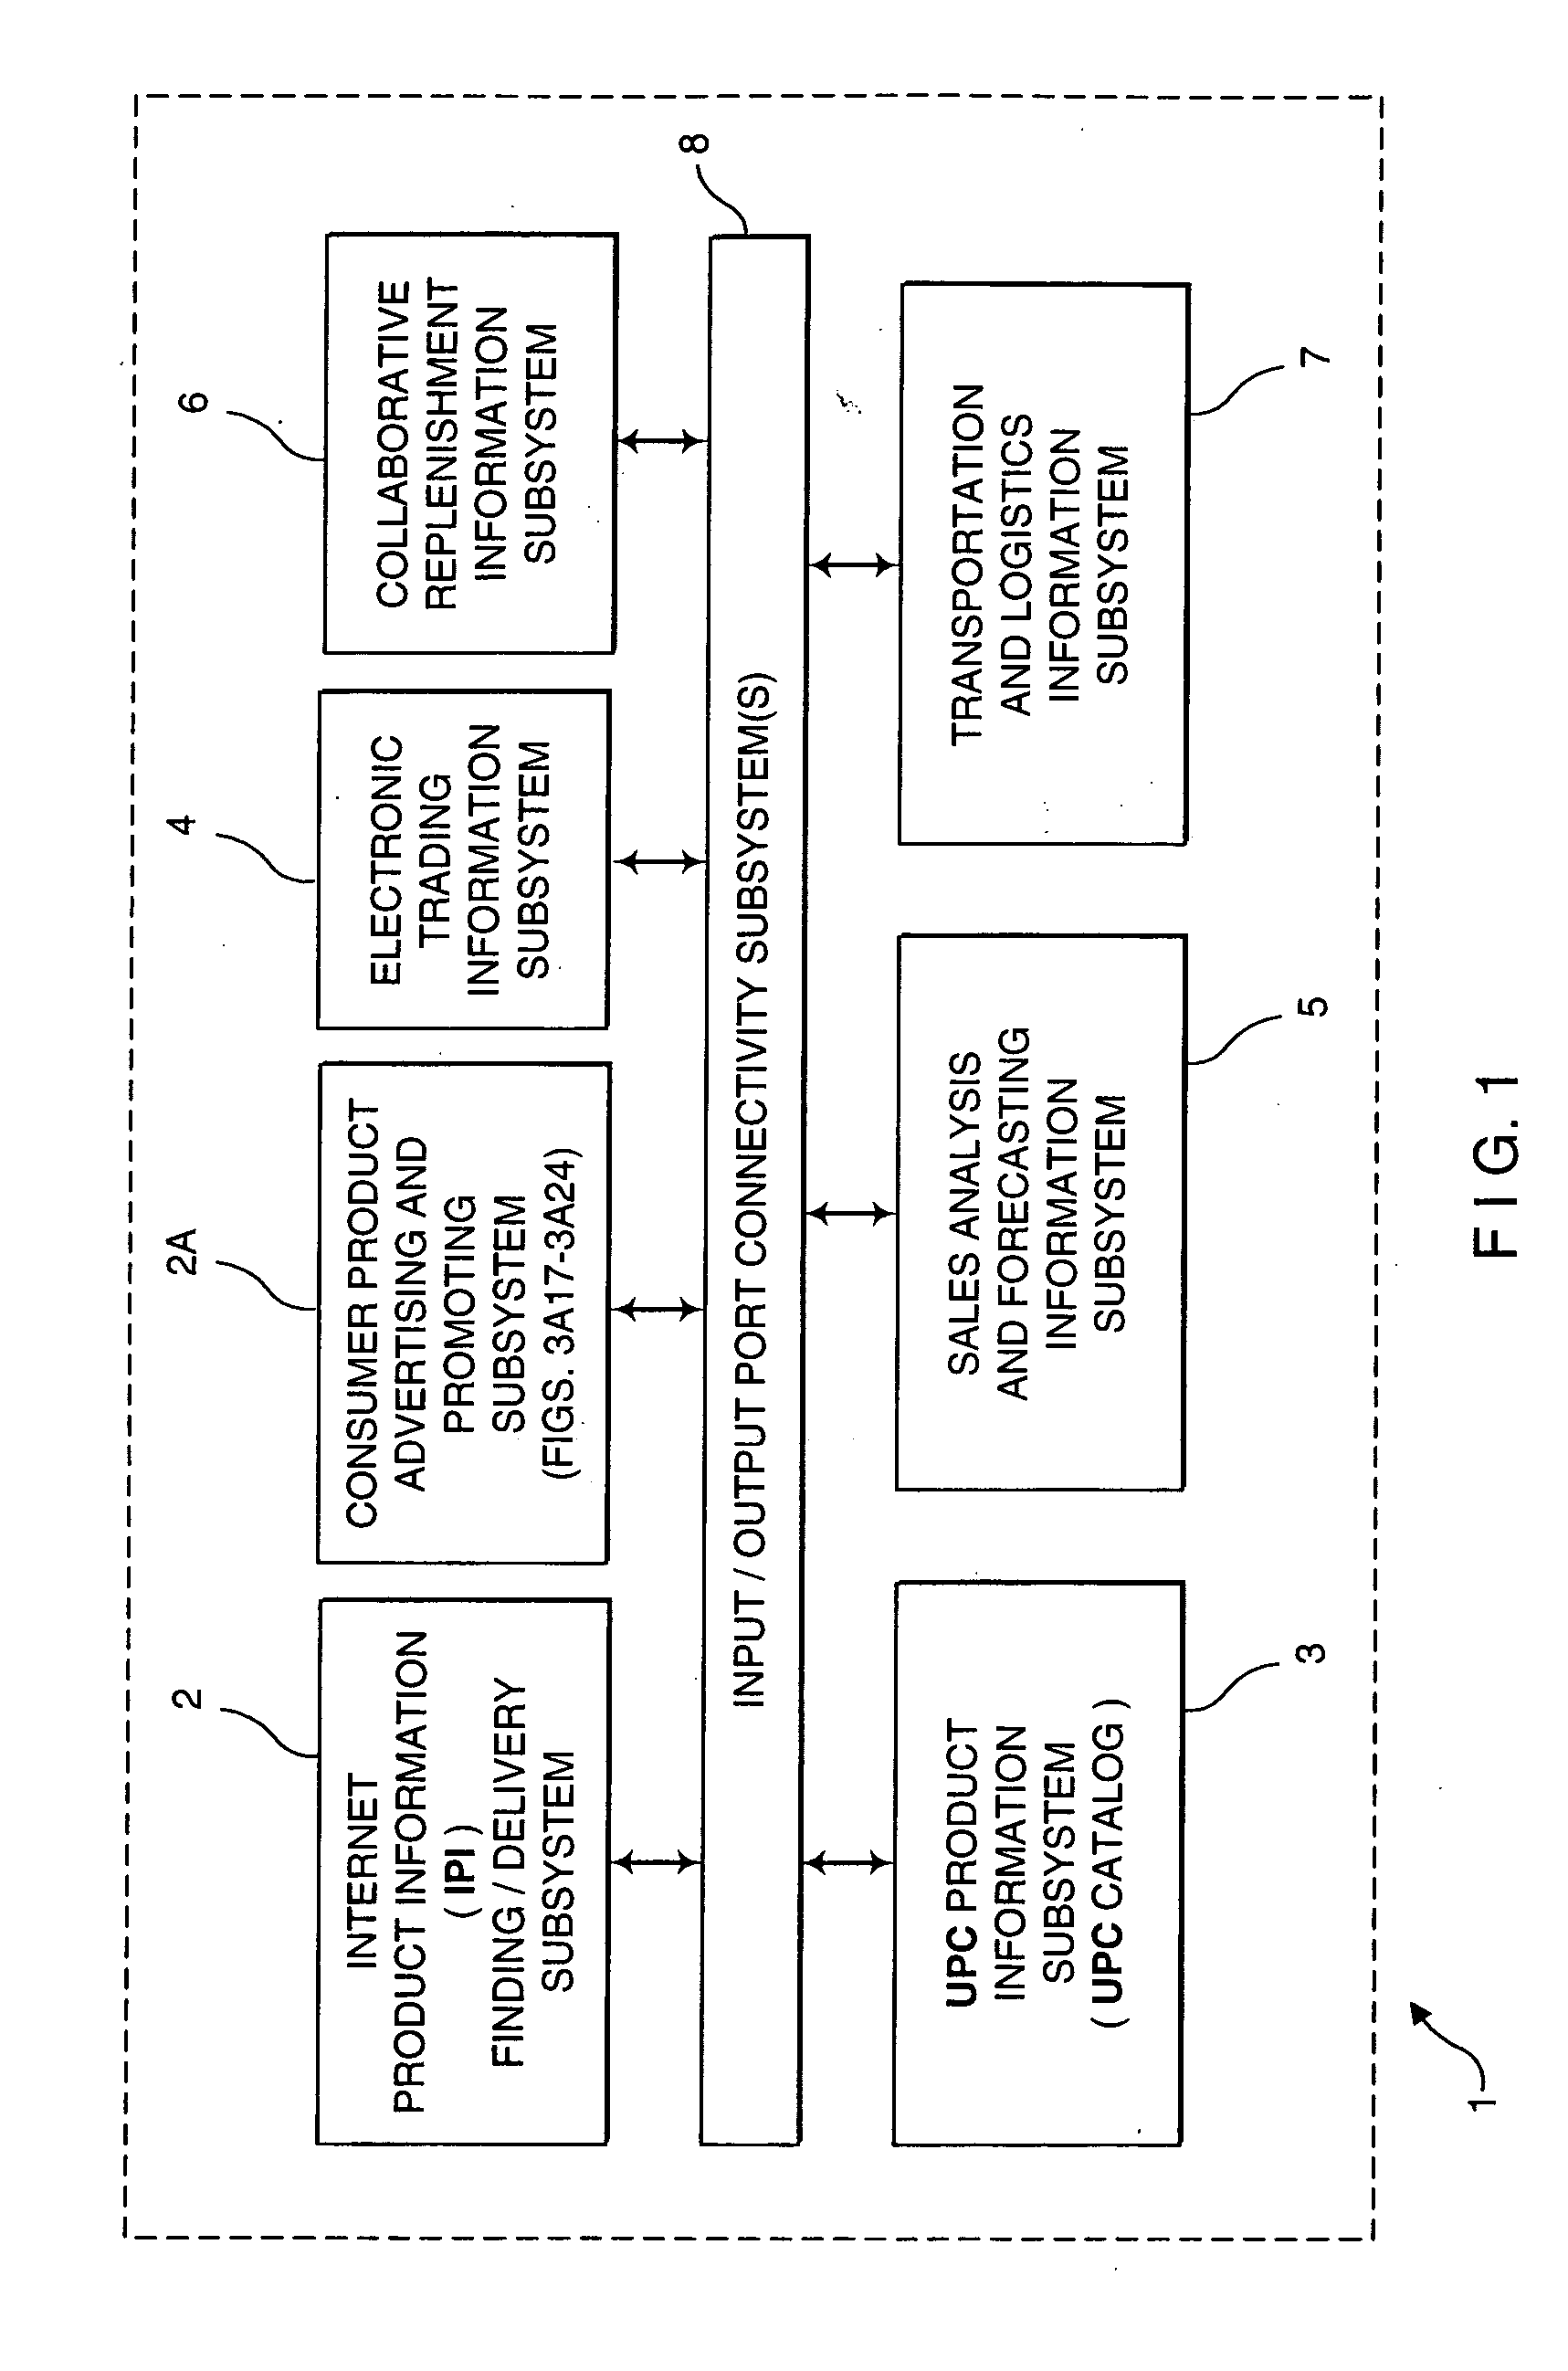 Internet-based method of and system for managing, distributing and serving consumer product related information to consumers in physical and electronic streams of commerce